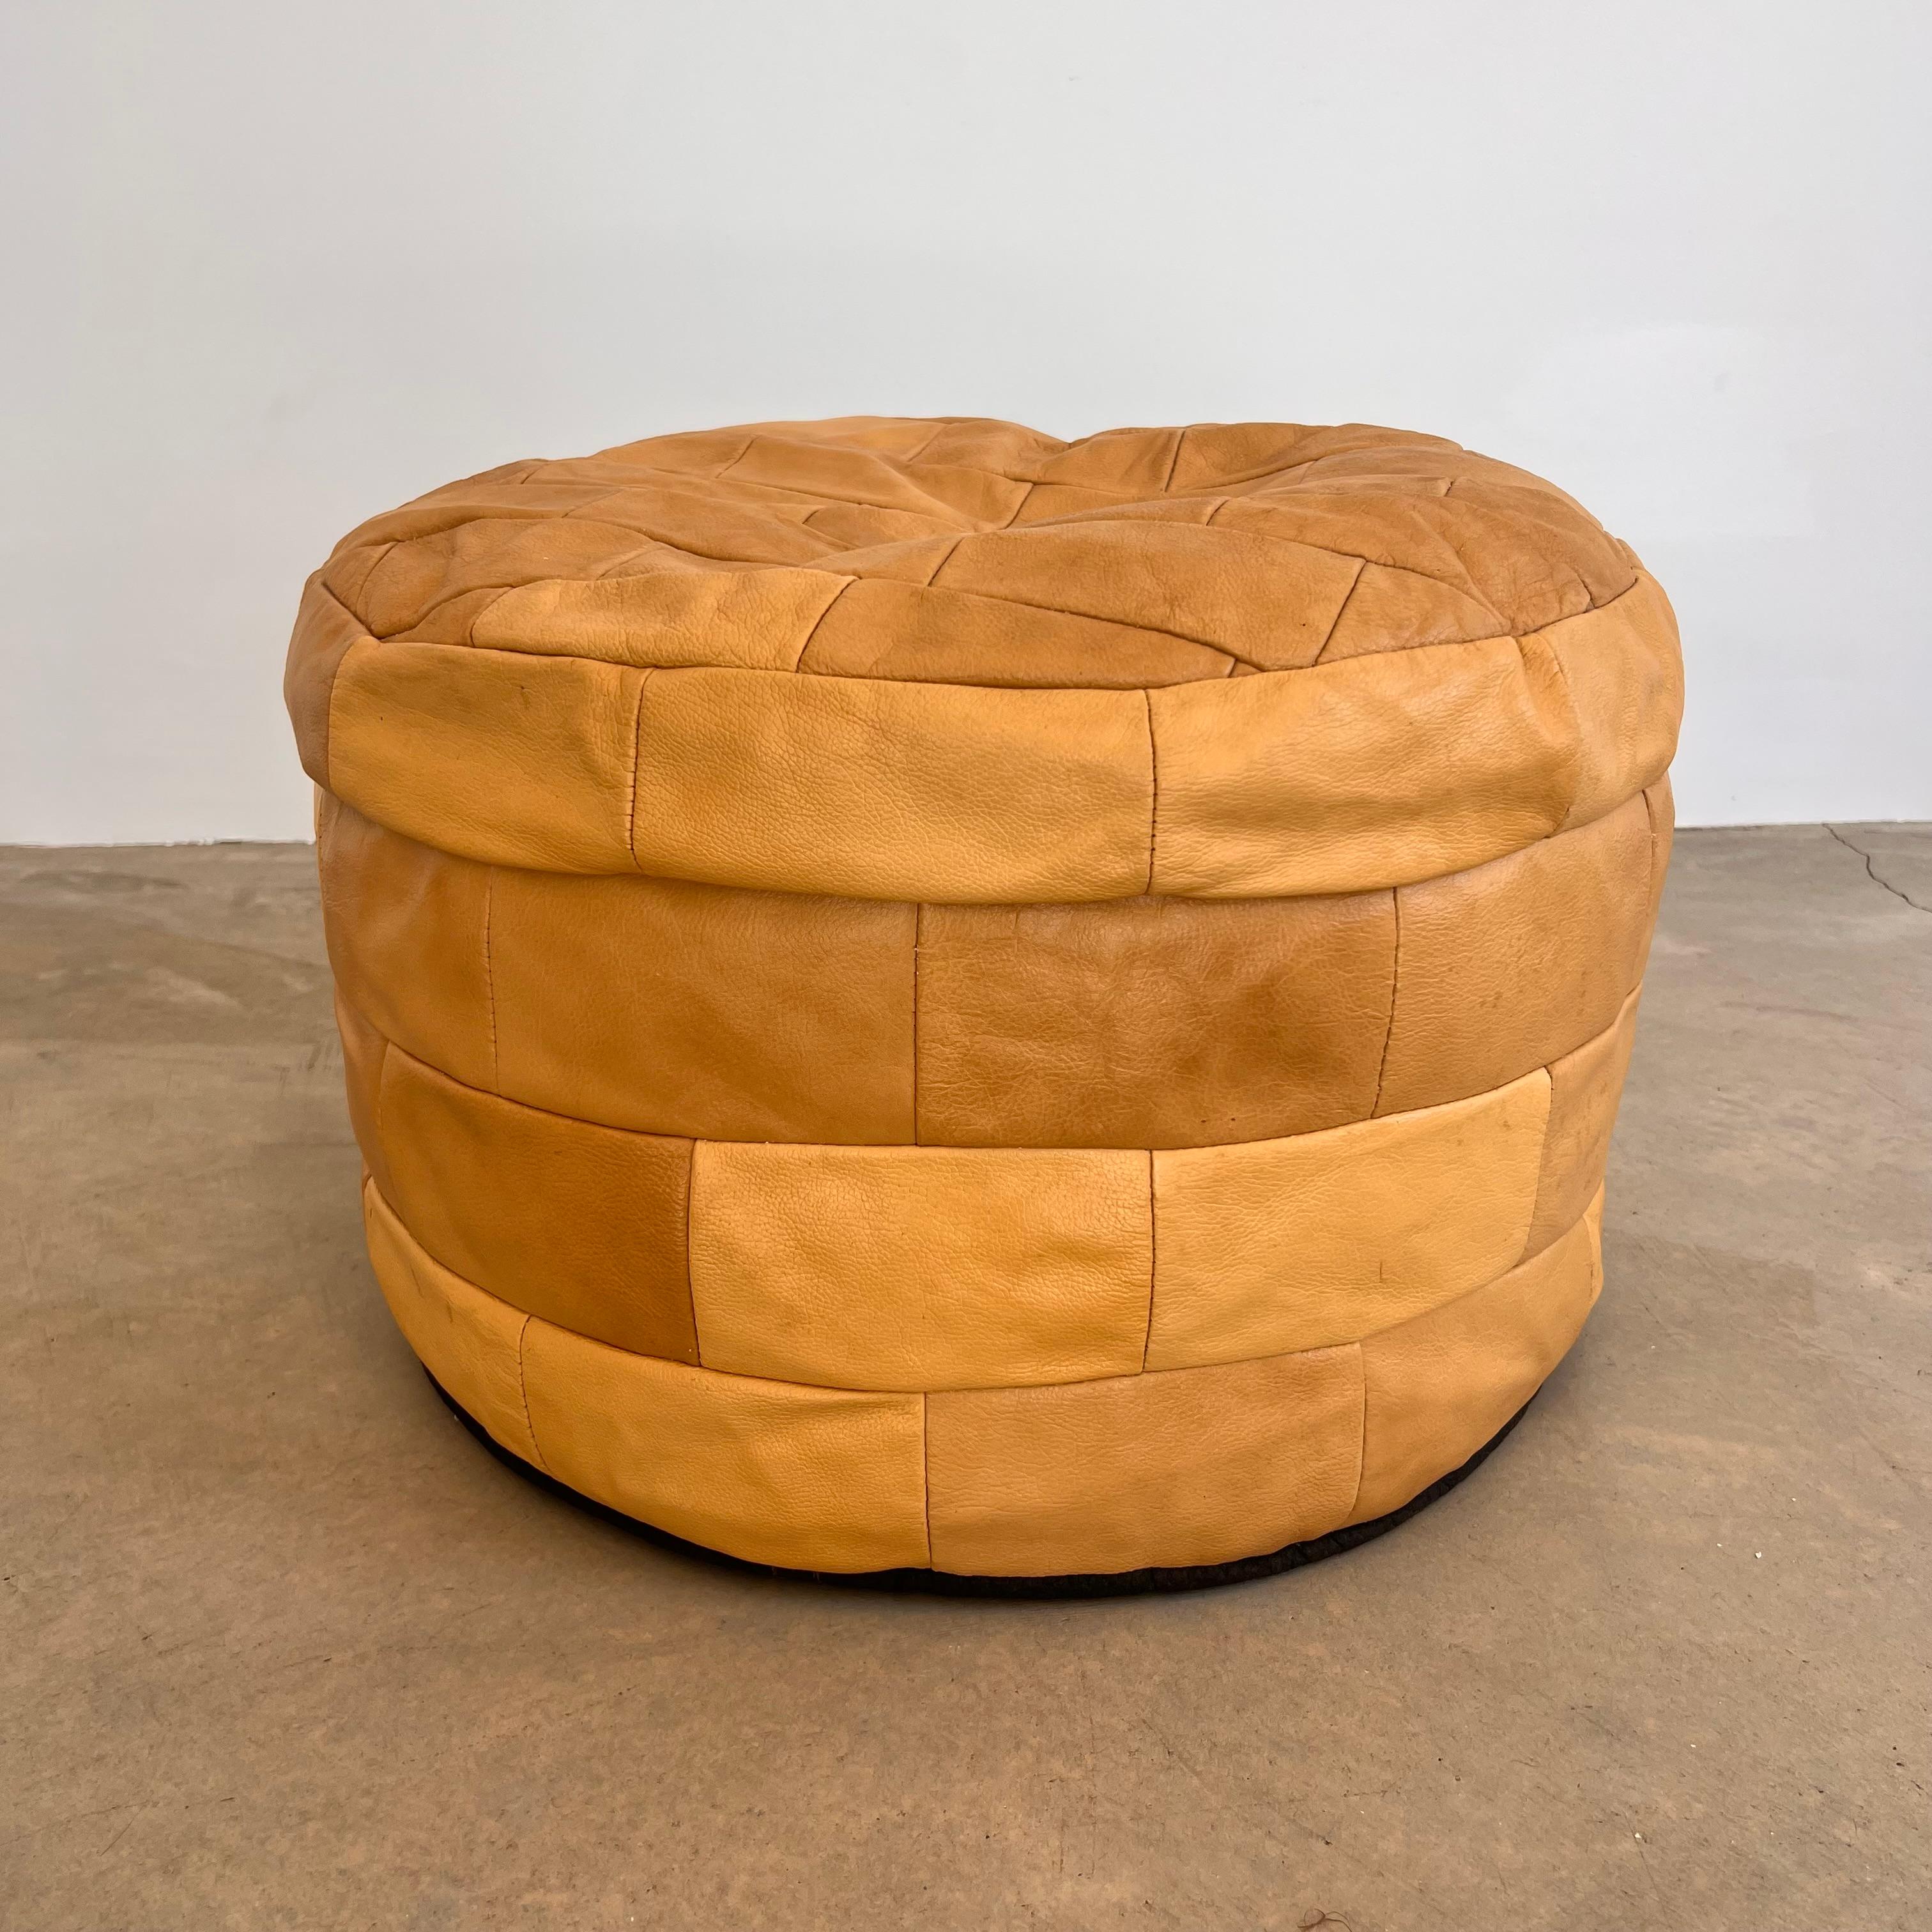 Wonderful and understated tan leather pouf/ottoman by Swiss designer De Sede with square patchwork. Handmade with wonderful faded patina or varying hues of sand and tan. Gorgeous accent piece. Good vintage condition. Wear appropriate with age. Brand